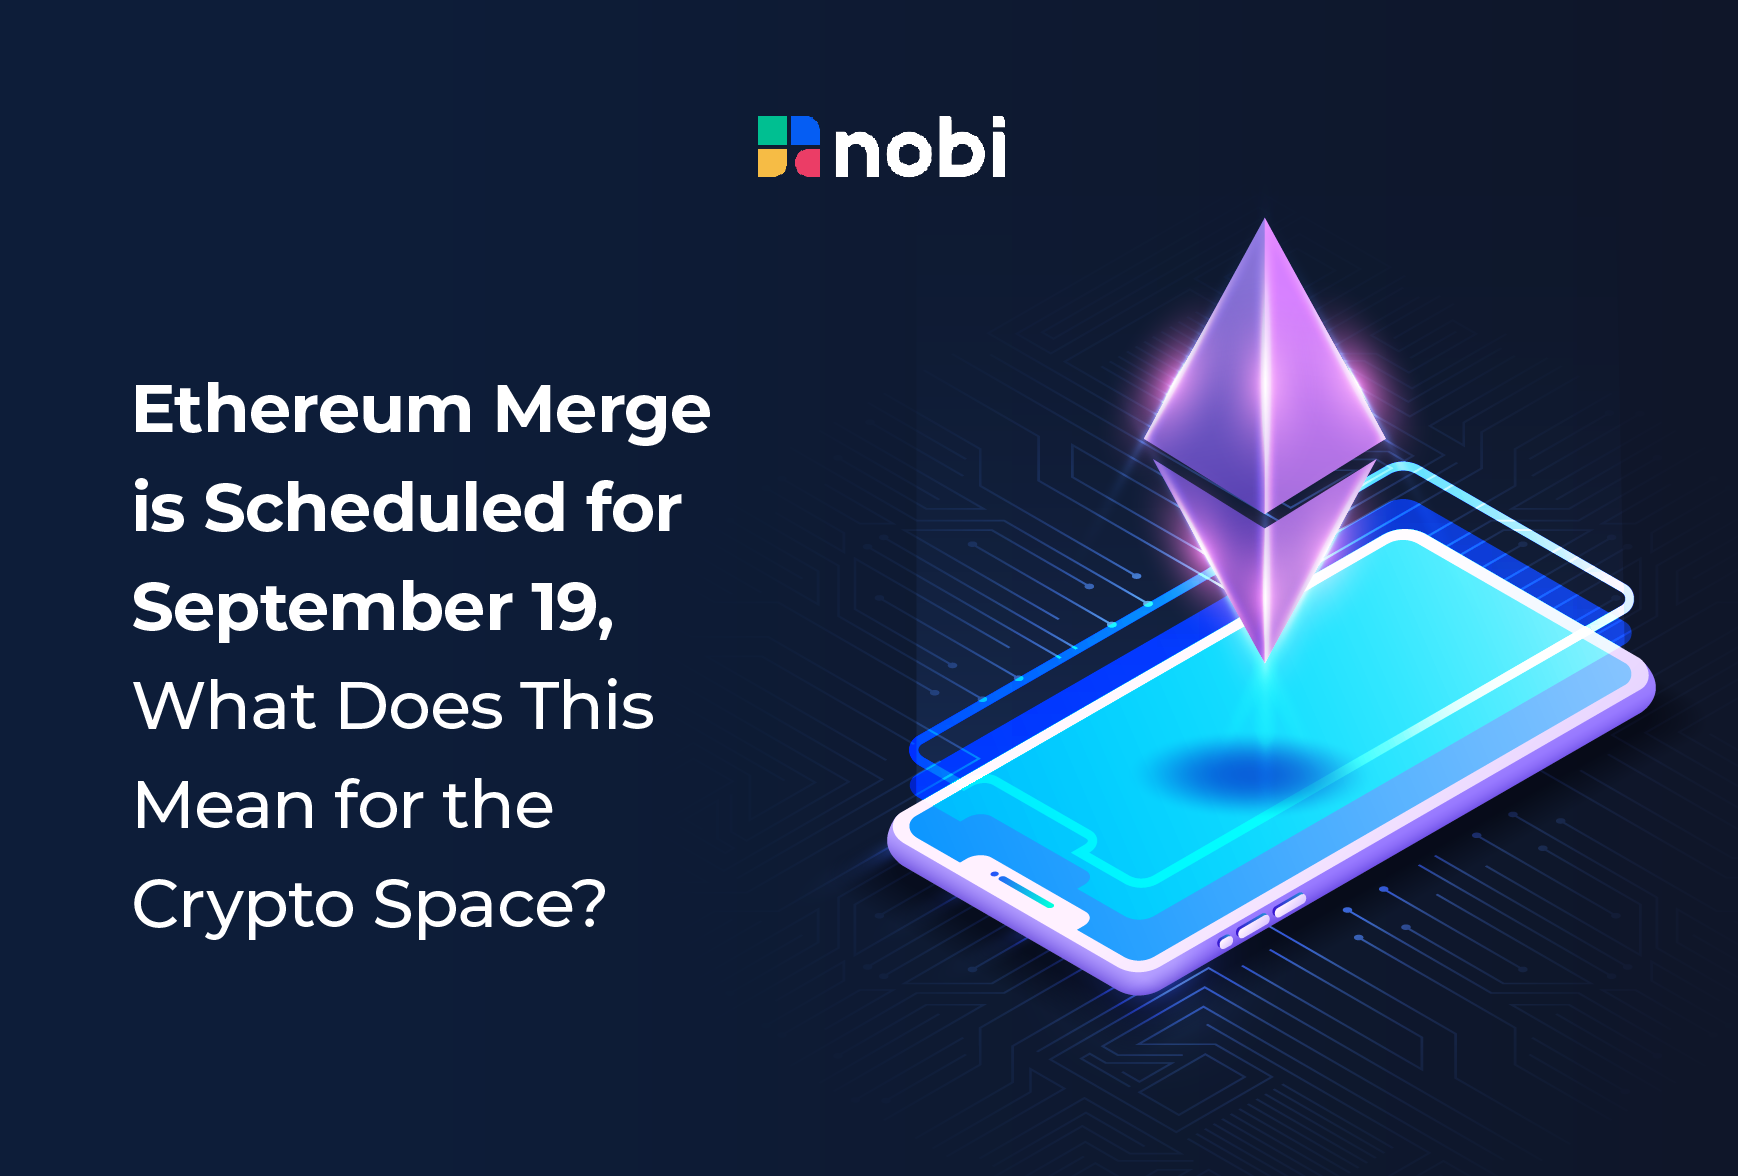 Ethereum Merge is Scheduled for September 19, What Does This Mean for the Crypto Space?